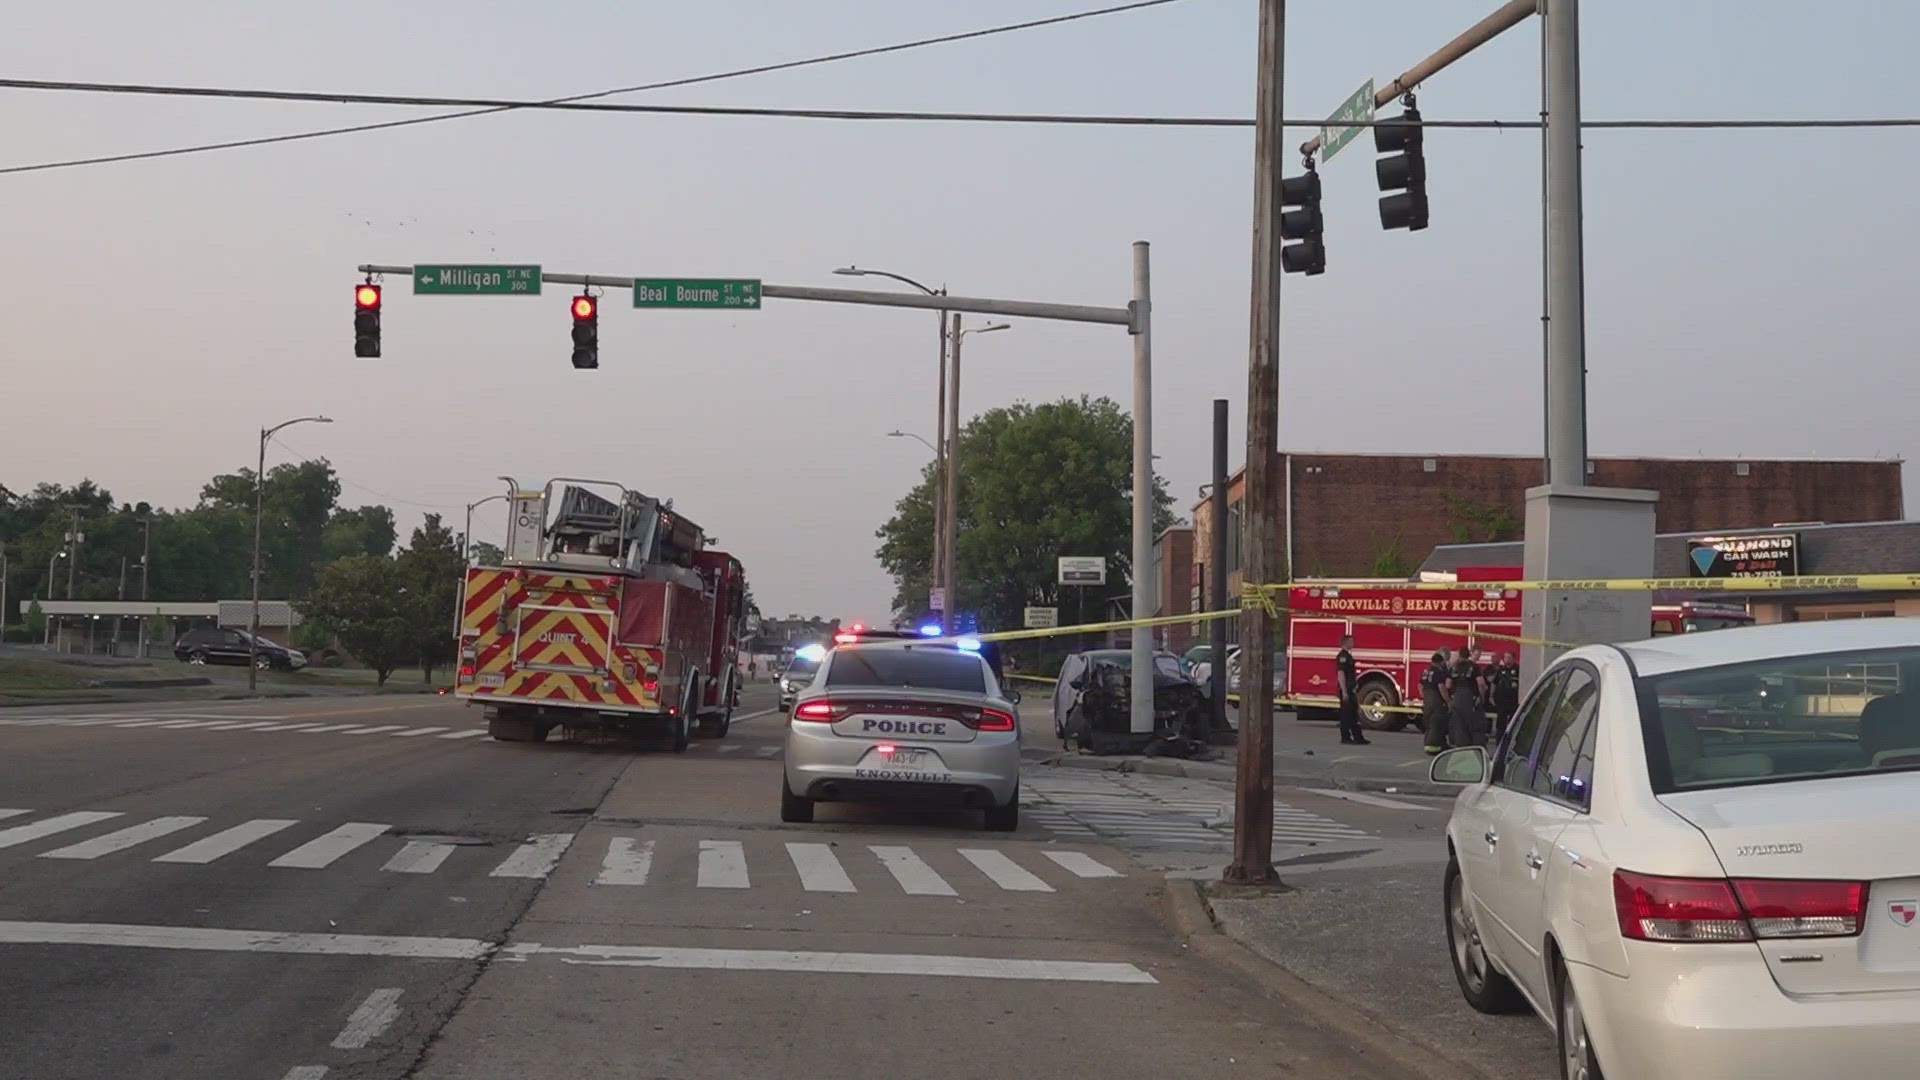 They said the crash happened at Magnolia Avenue and Beal Bourne Street.